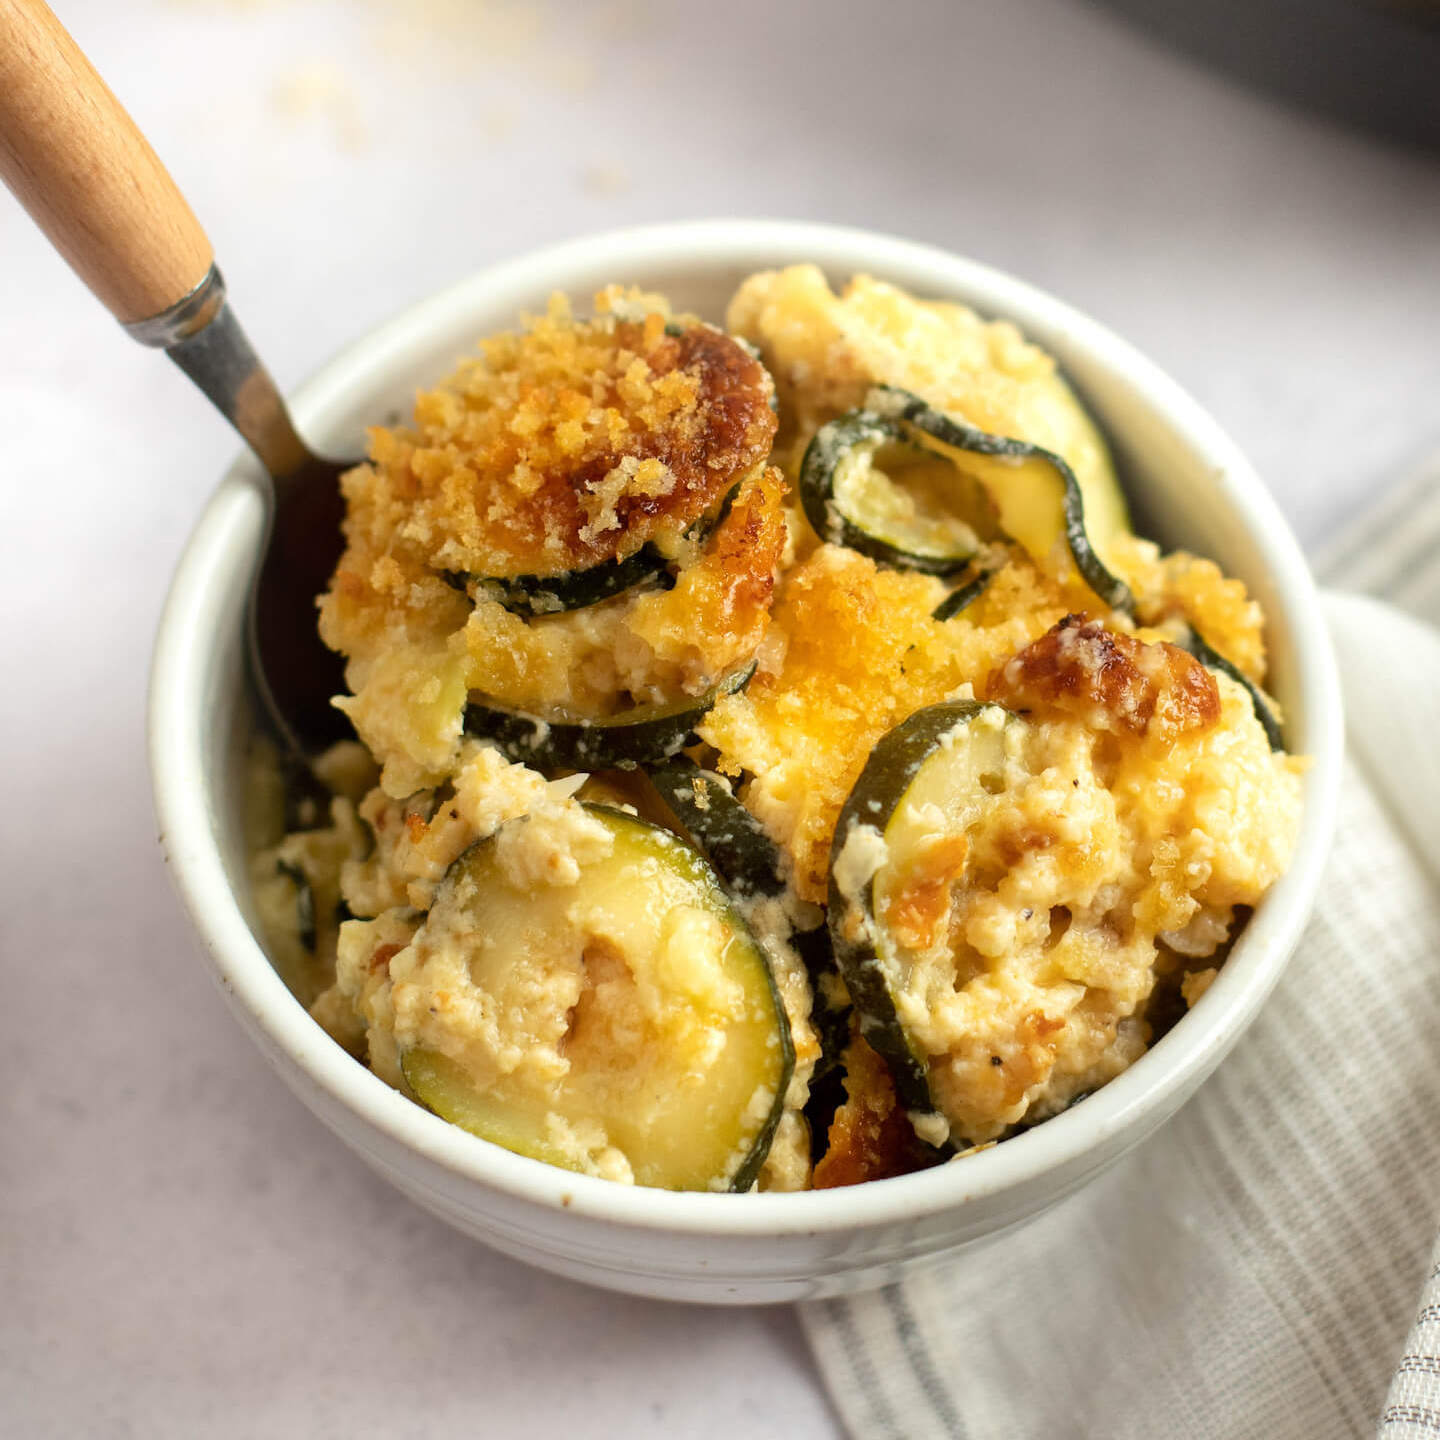 Zucchini casserole in a small white bowl with a fork on the side.